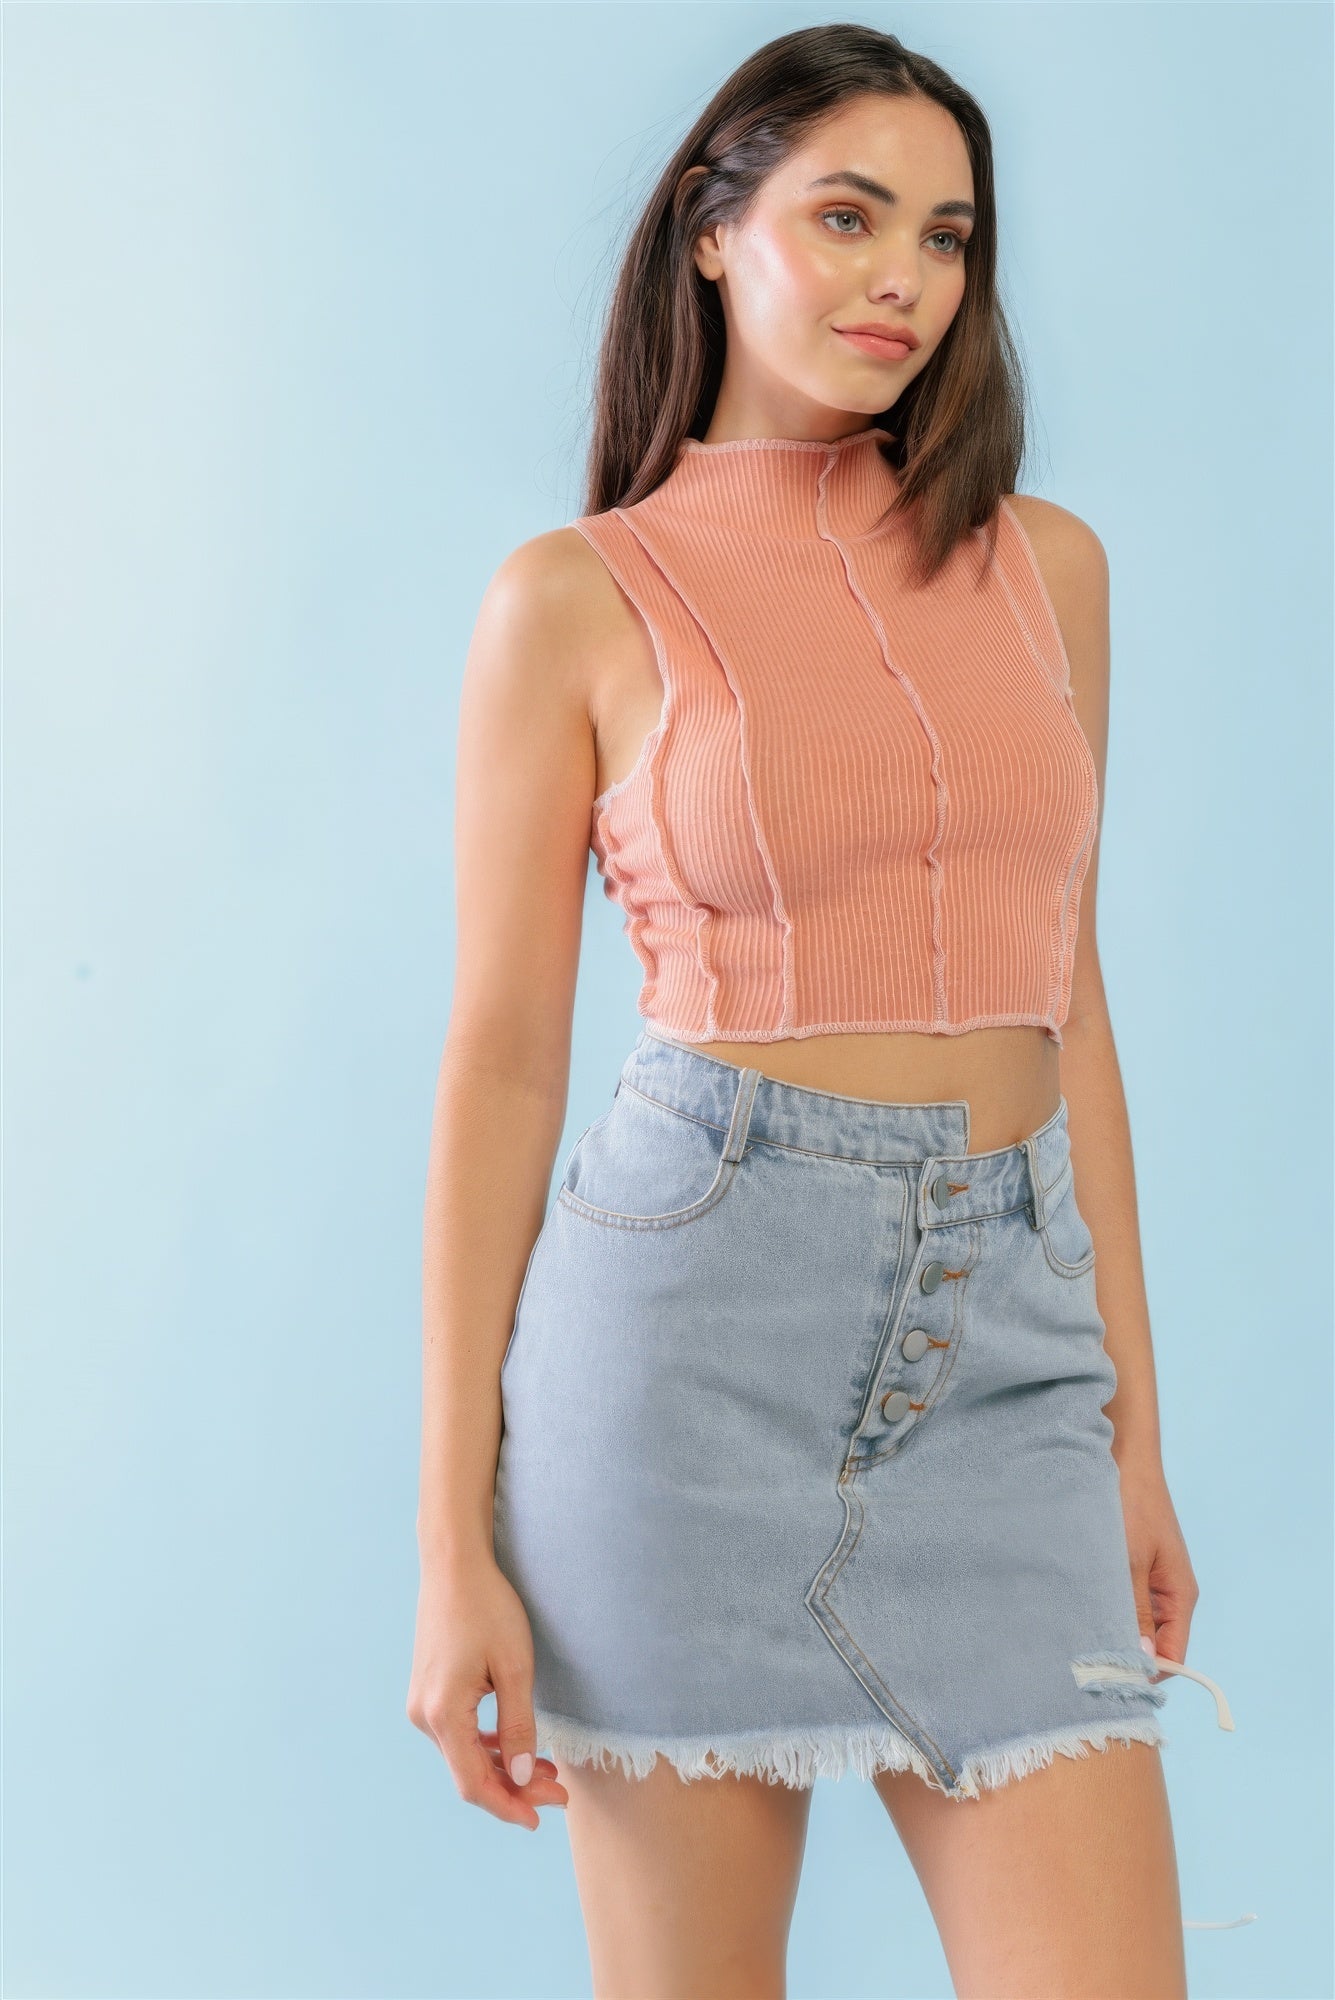 THE SATURDAY MOOD Dark Peach Ribbed Inside-out Sleeveless Mock Neck Crop Top